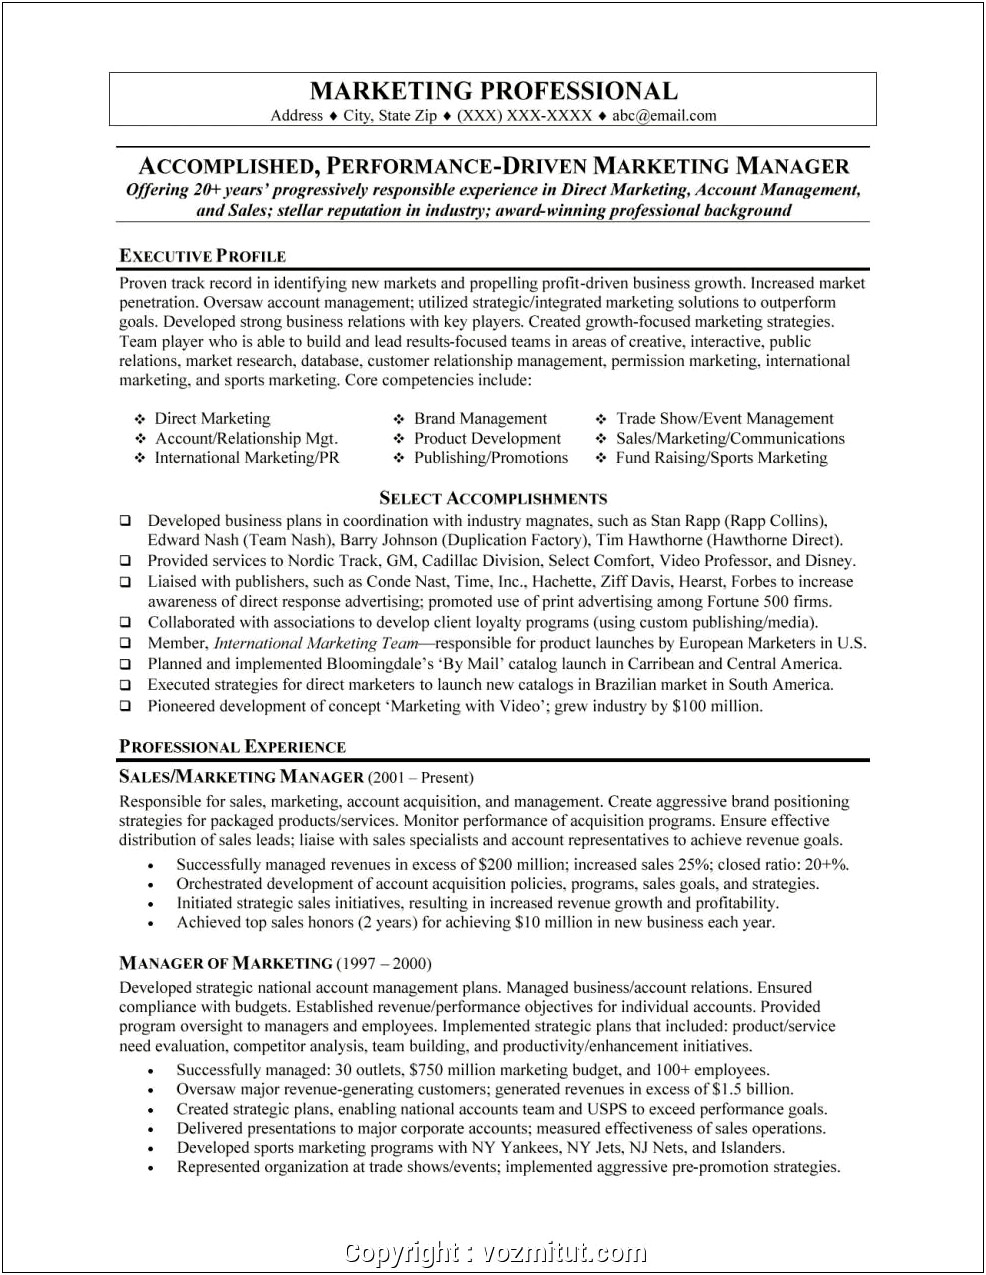 Where To Put Promotions And Awards In Resume